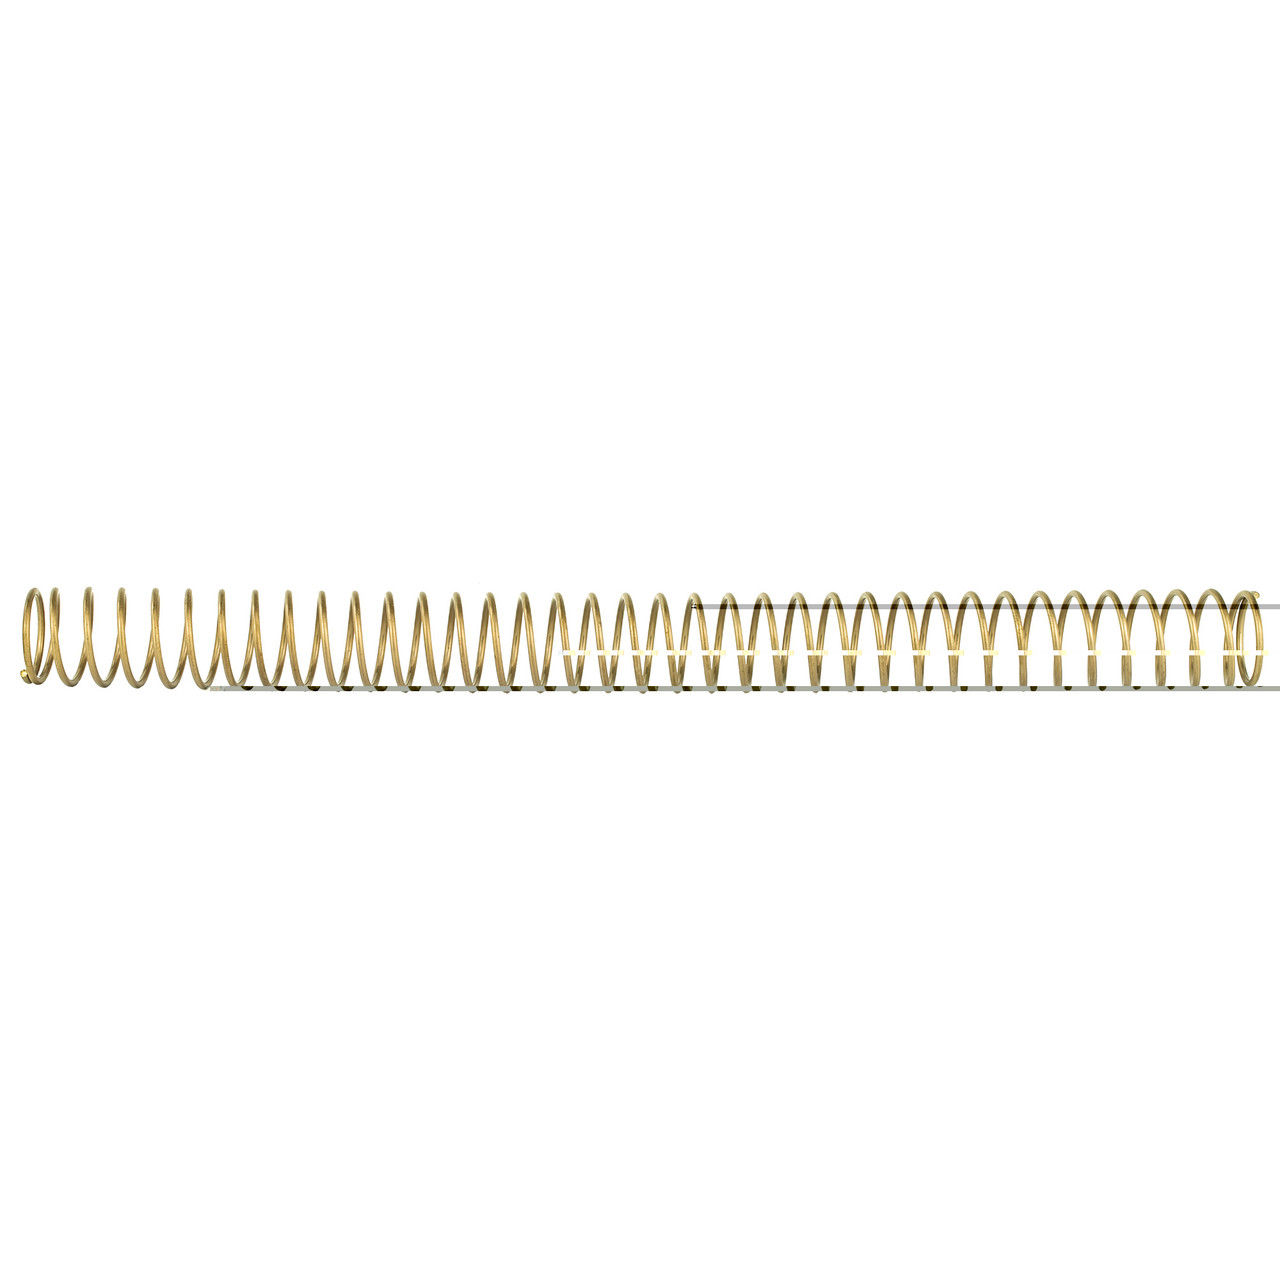 LBE Unlimited ARSPRG Ar Recoil Spring Carbine Length